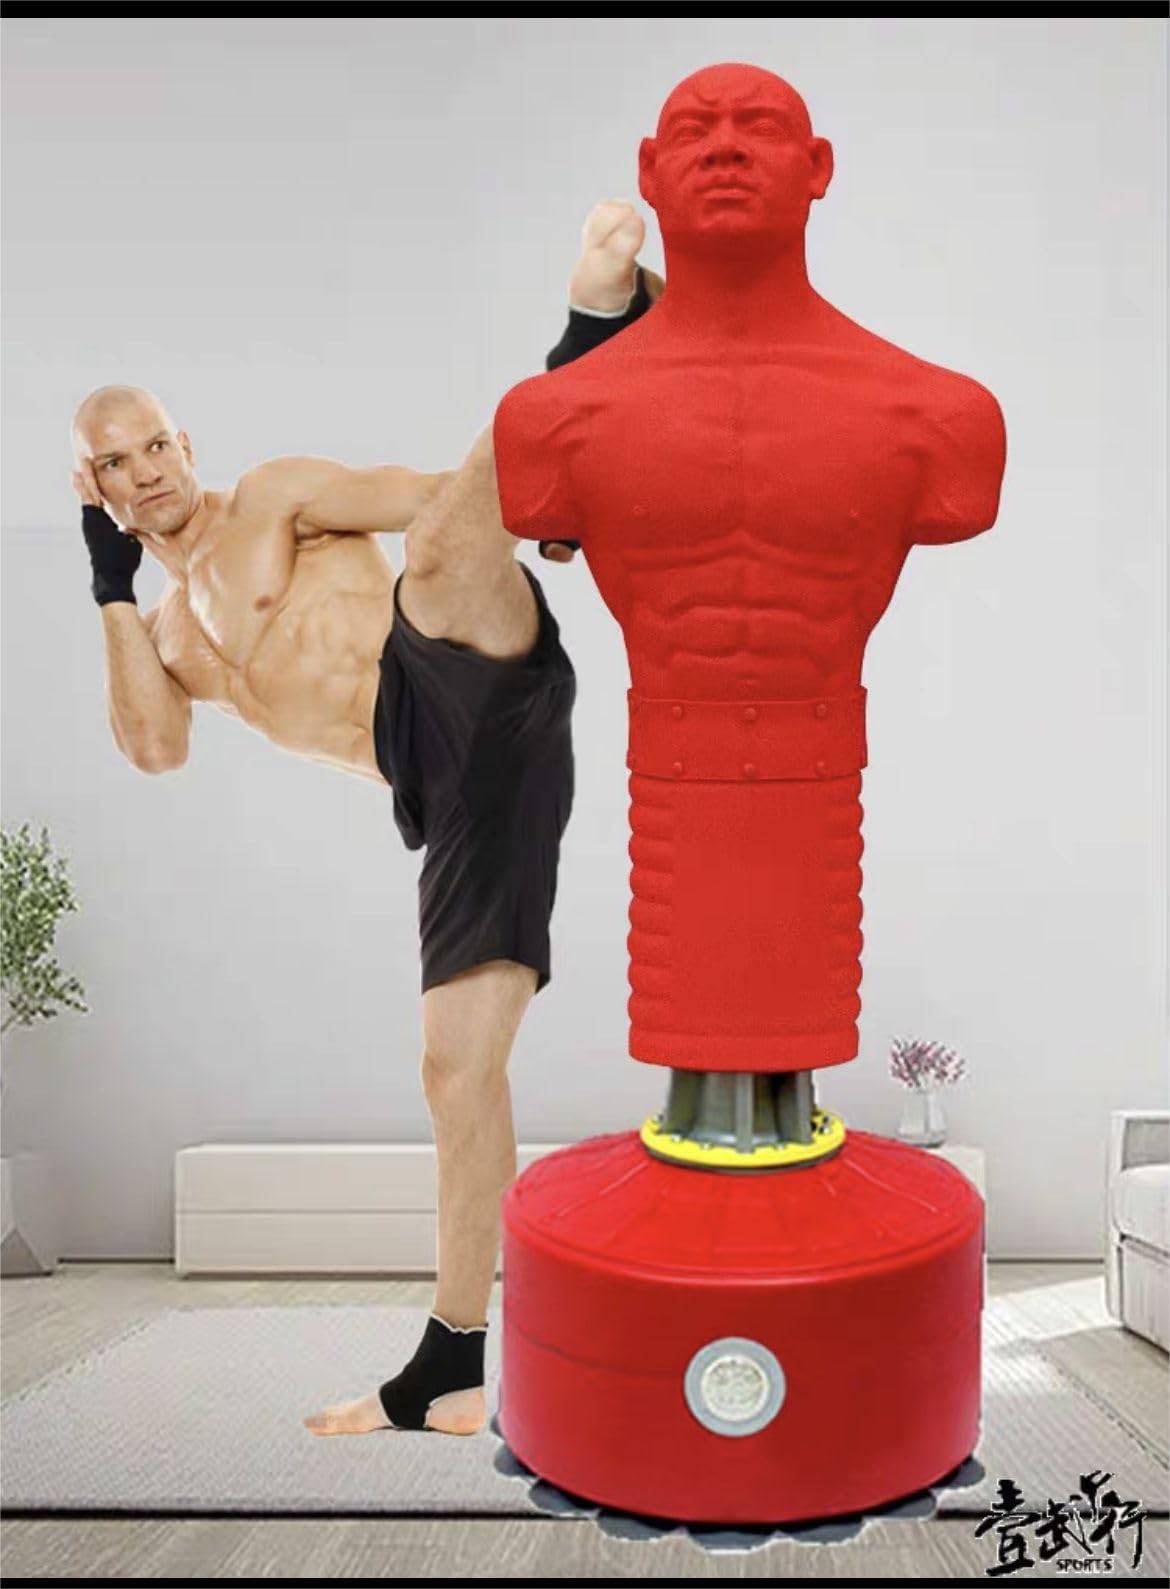 Cool Baby Boxing Dummy, Full Body Boxing Frame, Silicone Punching Bag - COOL BABY